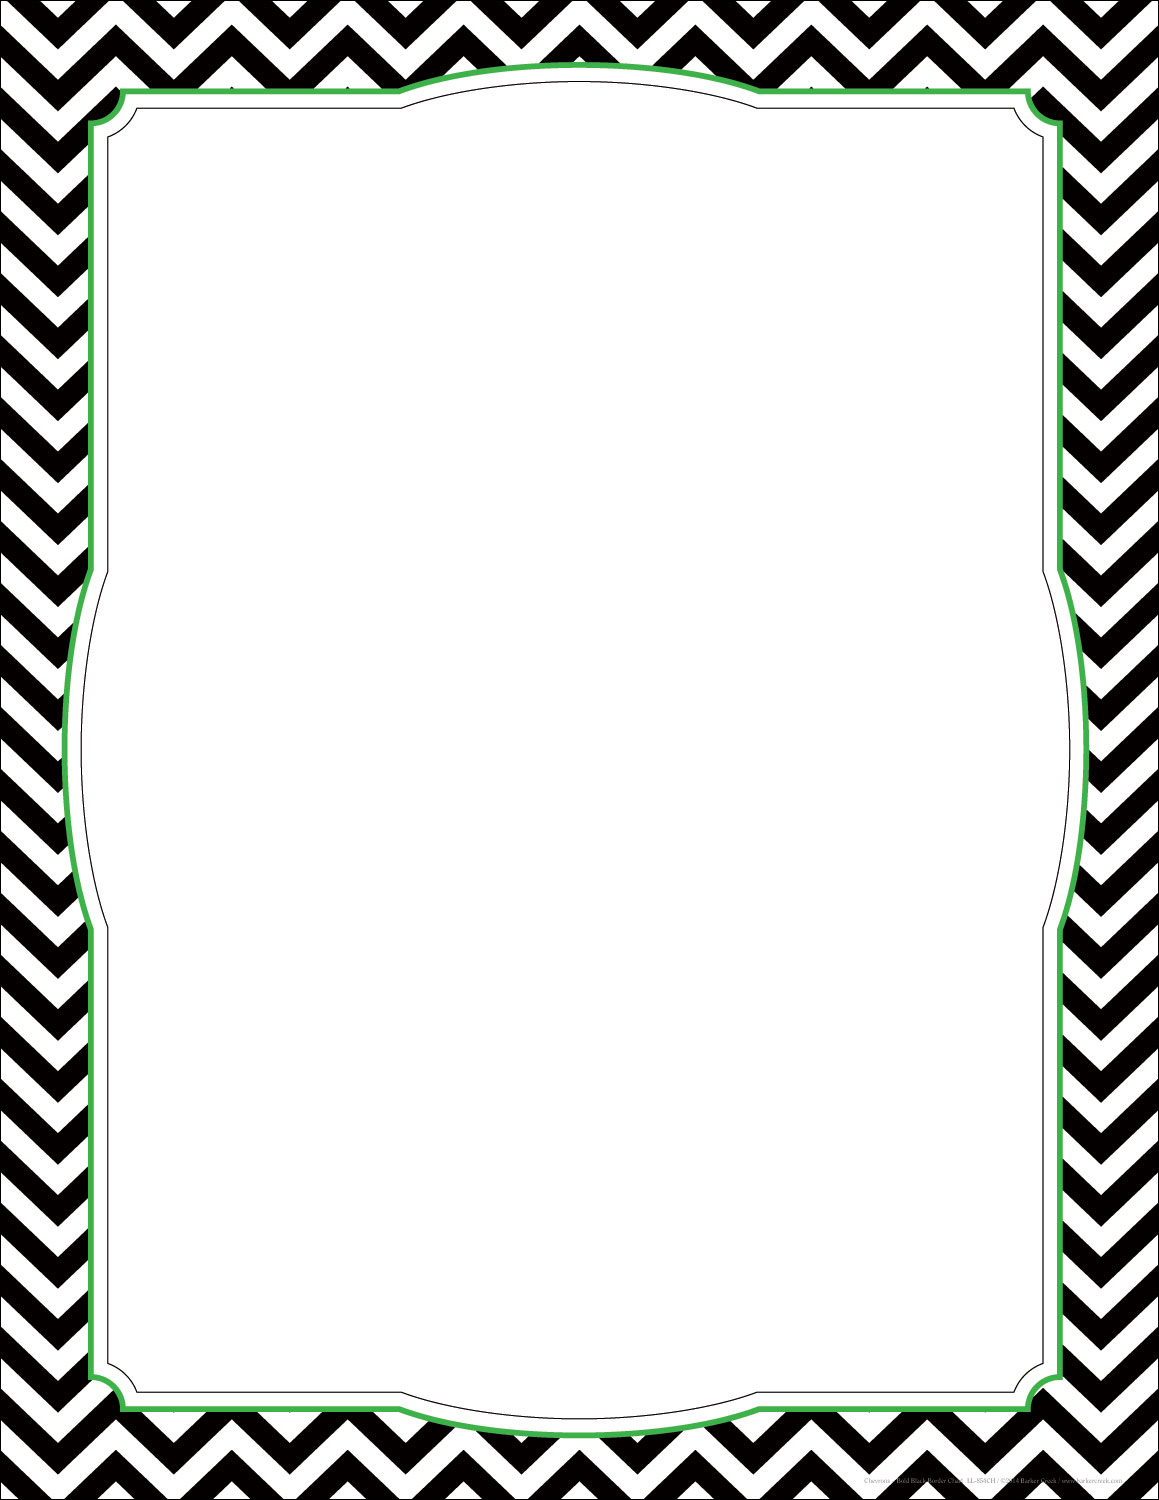 Chevron borders clipart free large images